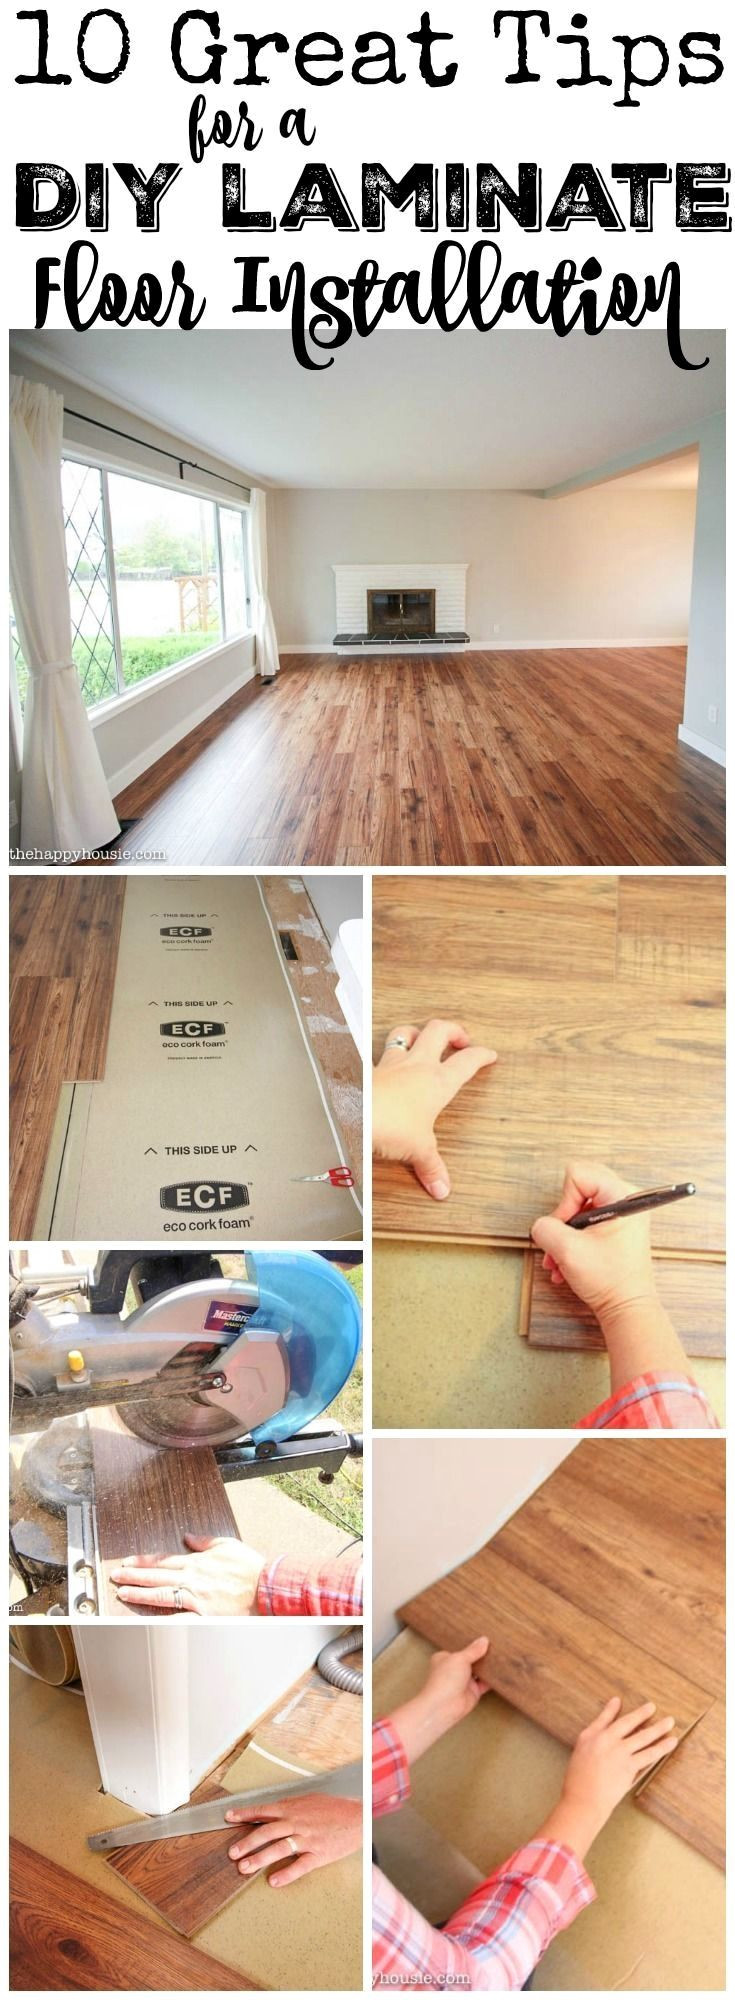 22 Spectacular Mazama Smooth Acacia Hardwood Flooring 2024 free download mazama smooth acacia hardwood flooring of 9 best flooring images on pinterest floors diy flooring and pertaining to 10 great tips for a diy laminate floor installation at thehappyhousie com 